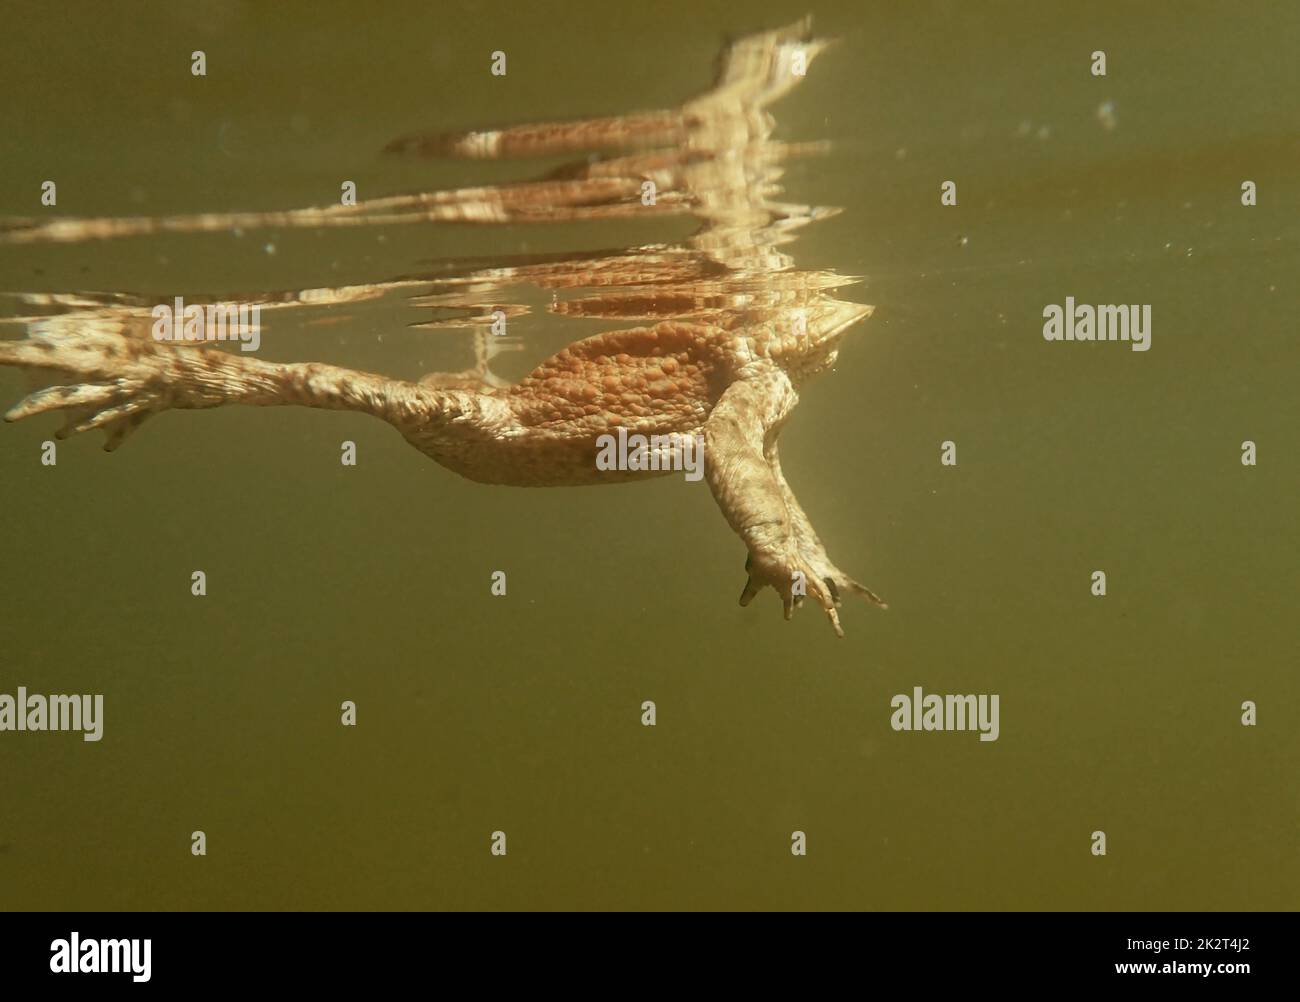 Underwater shot of toads swimming on the surface of a lake Stock Photo